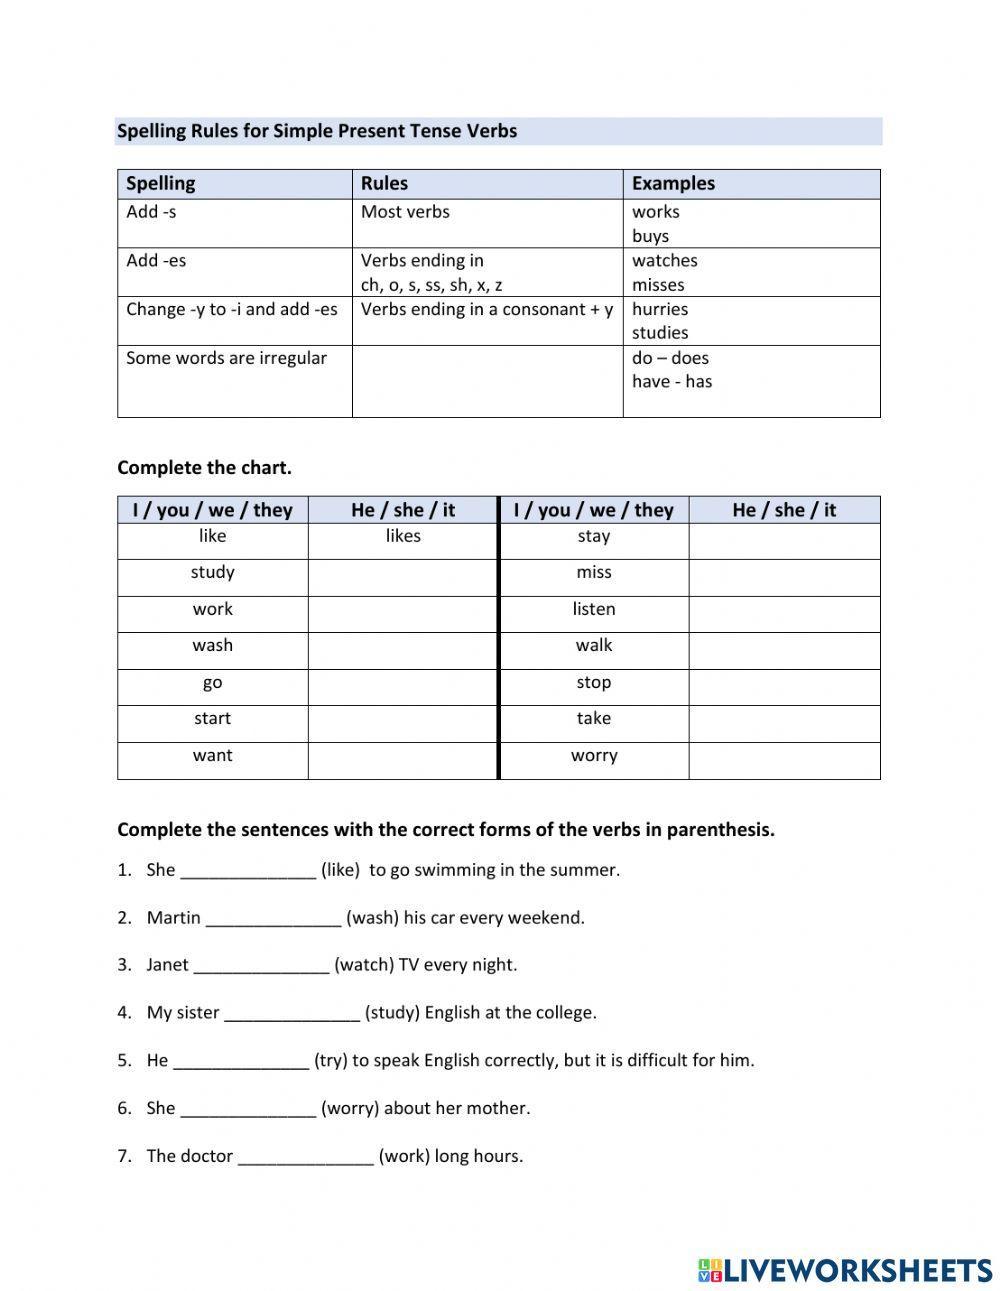 Spelling Rules for Simple Present Tense Verbs